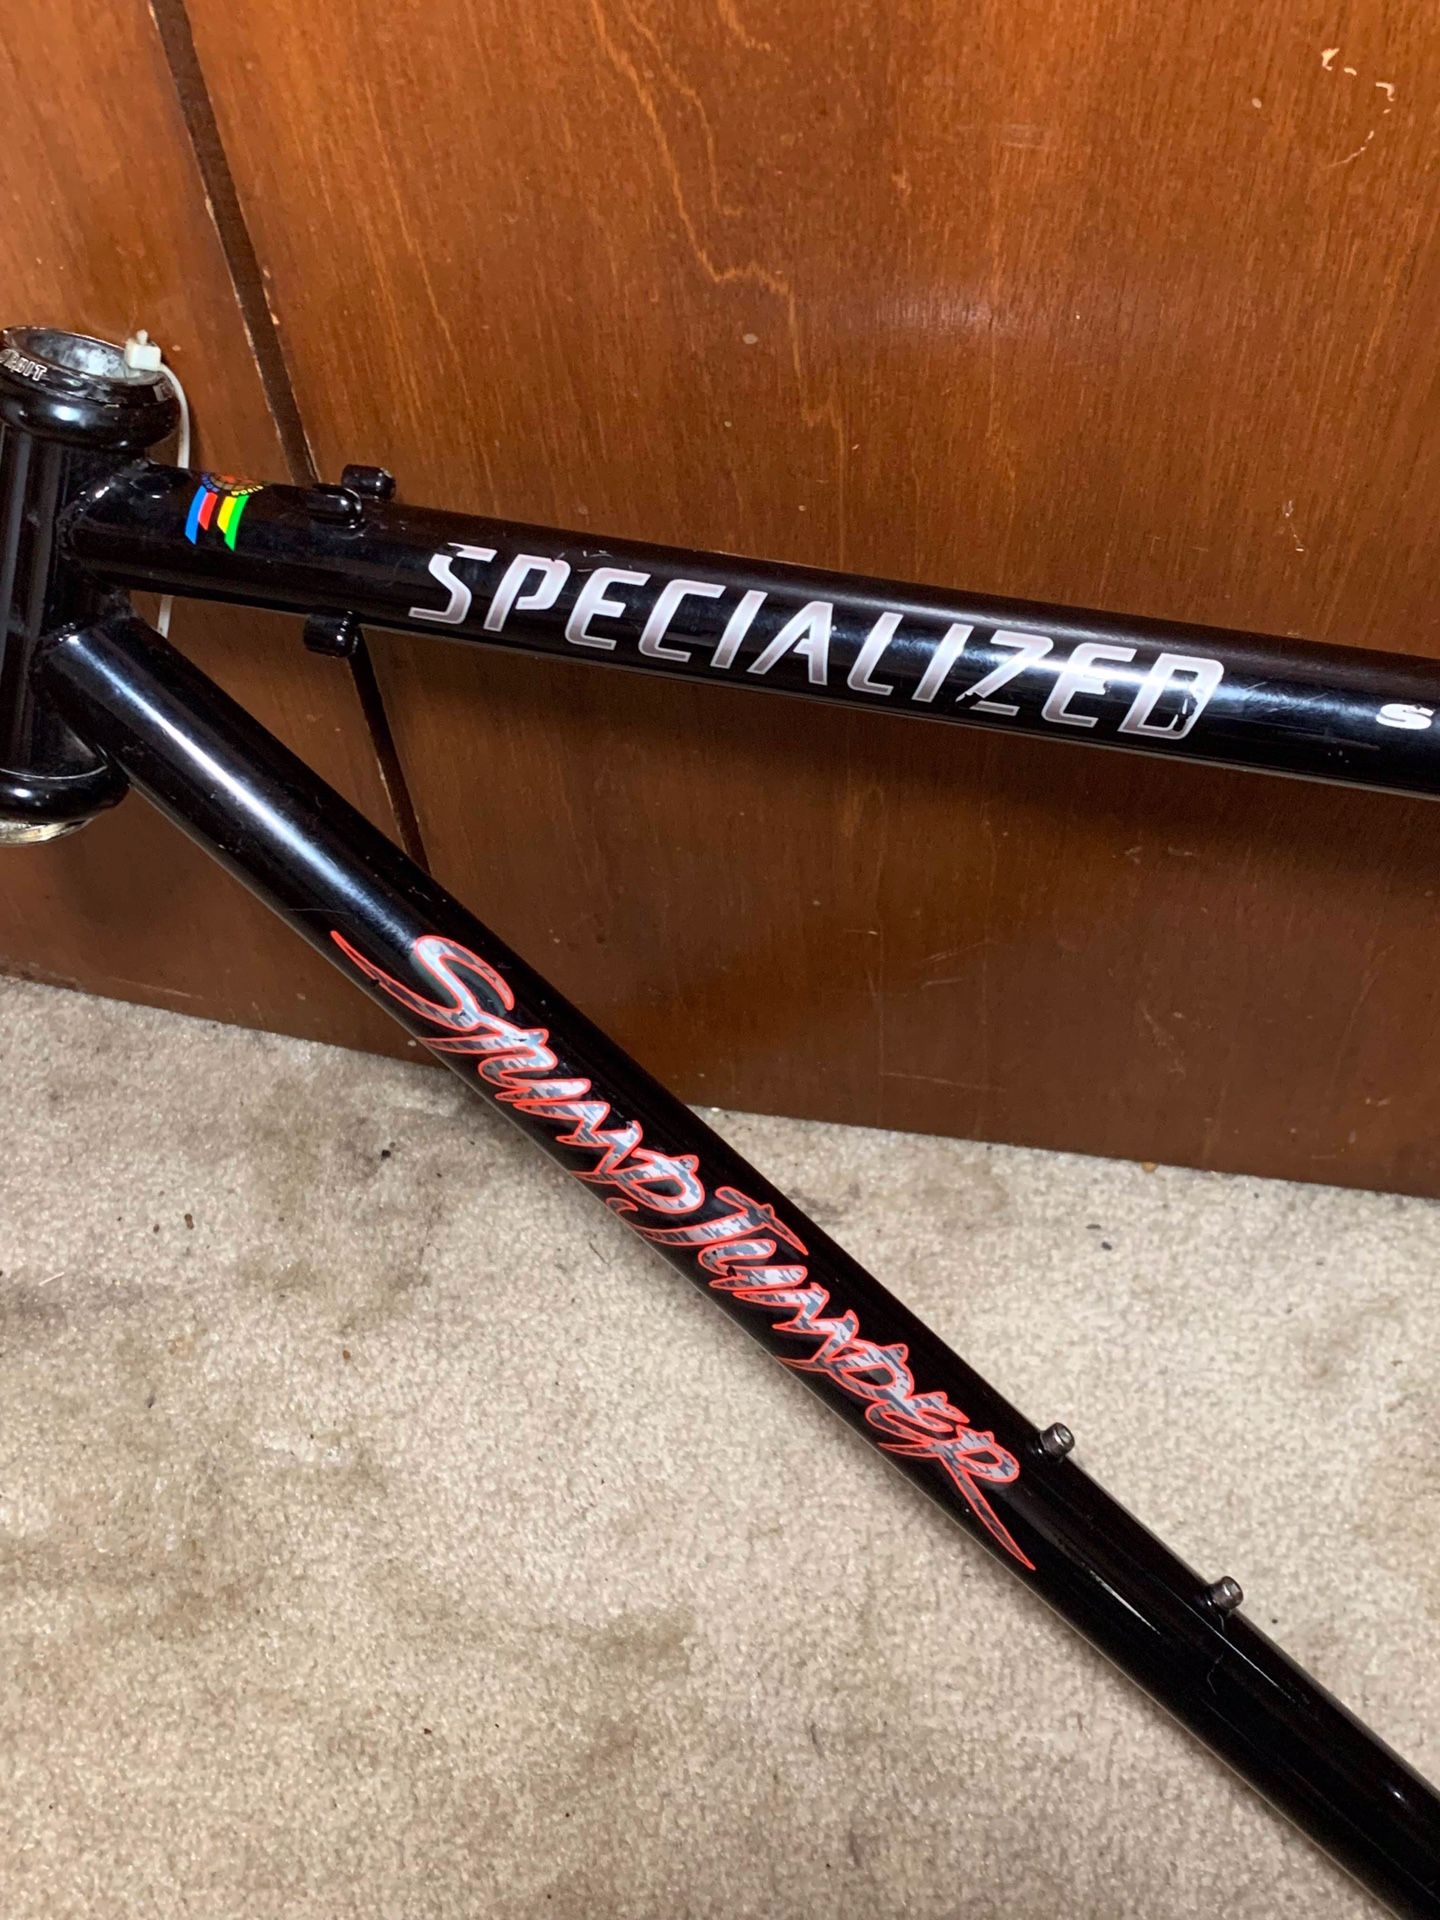 Stumpjumper Specialized 90s mountain bike frame never used